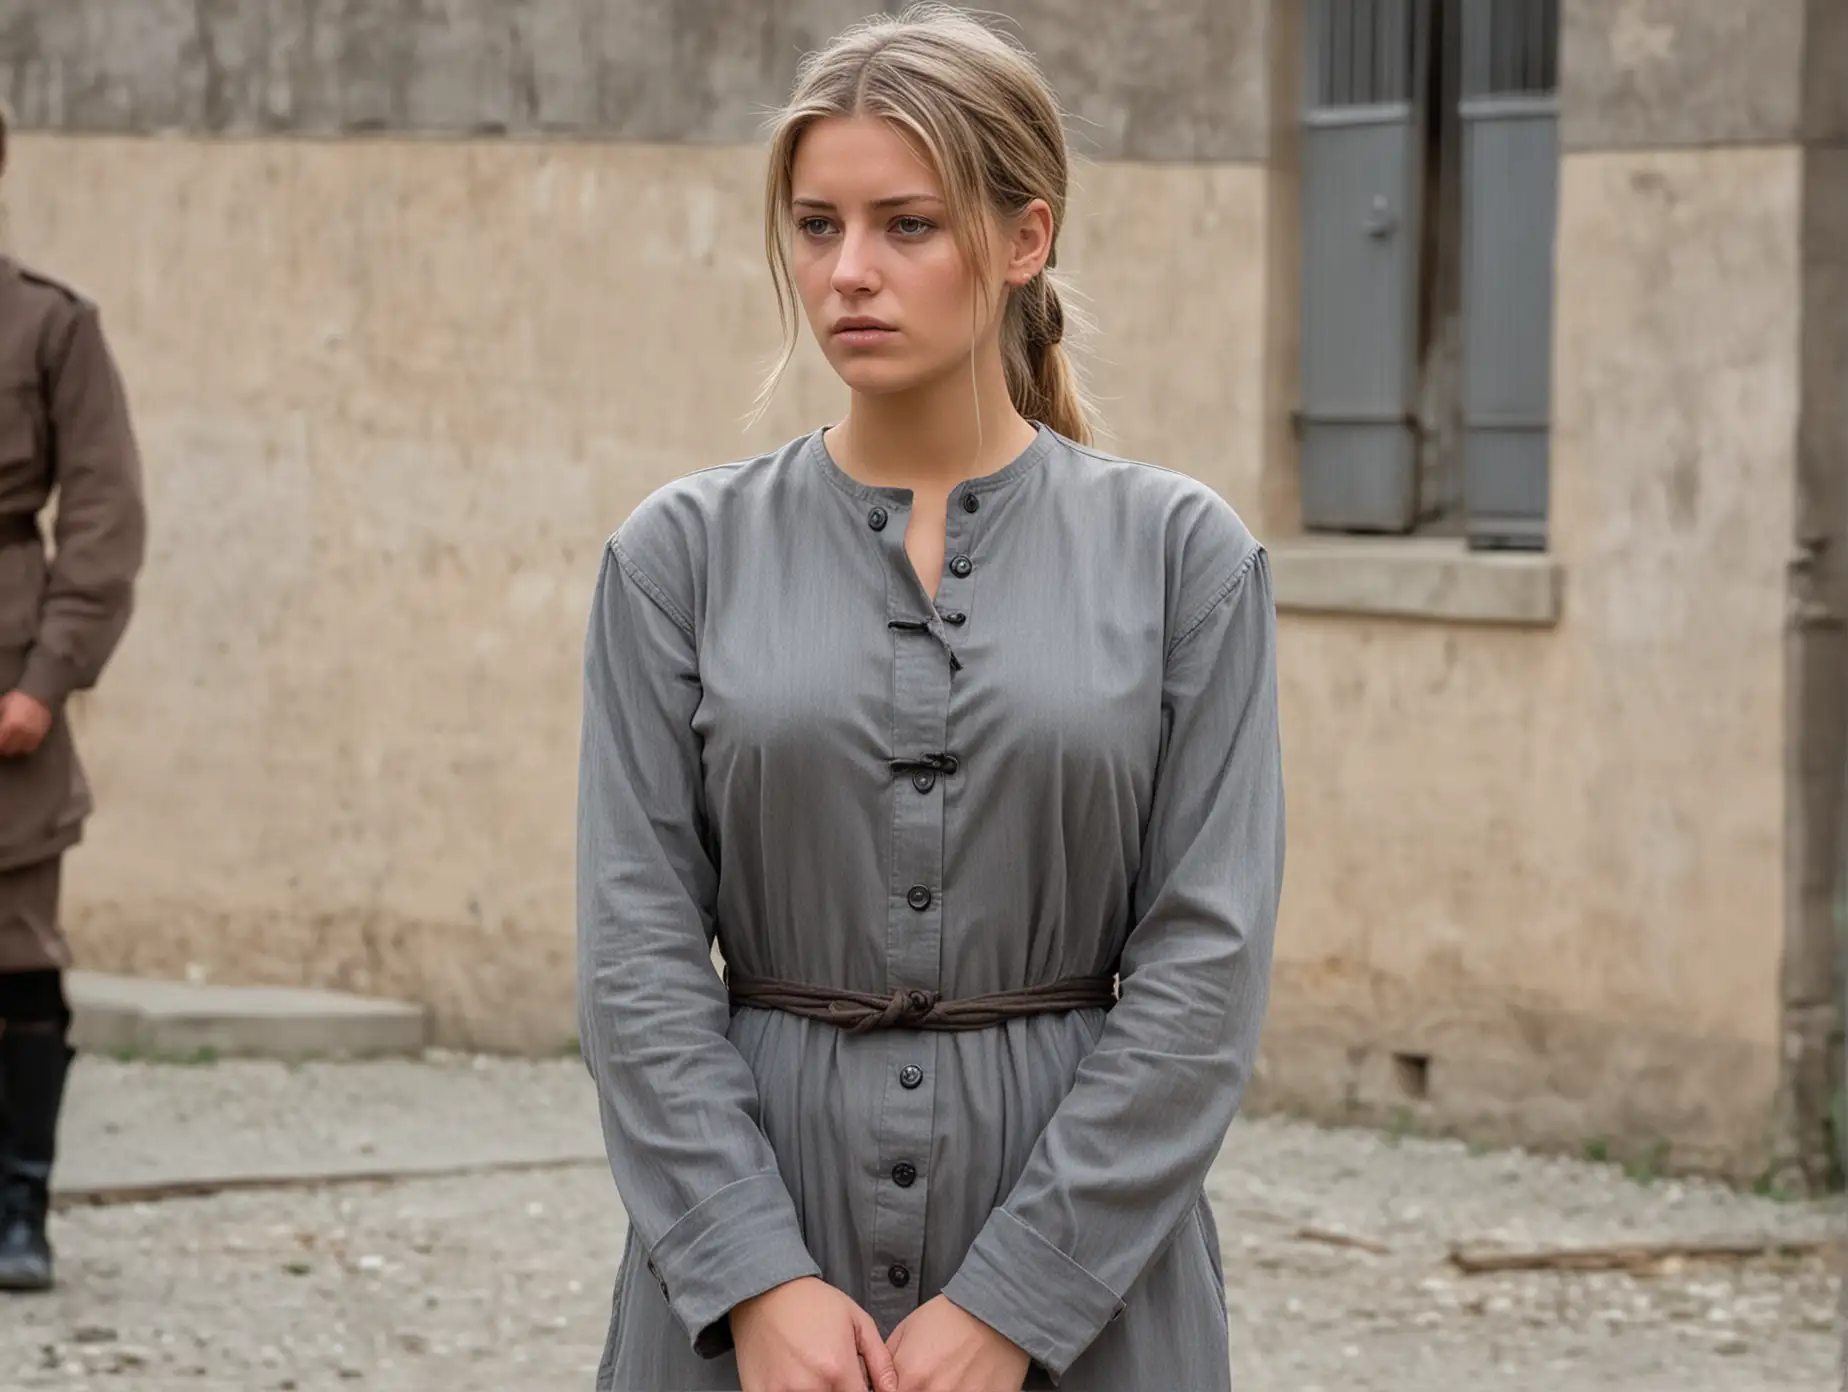 A busty female prisoner (german, 18 years old) stand  in a prisonyard (1900s) in worn gray buttoned longsleeve collarless prisonerdress( round-neckline, tied back hair), head to knee view, She is very sad and desperate, head down, few civilian is standing behind her in brown-beige-black clothes